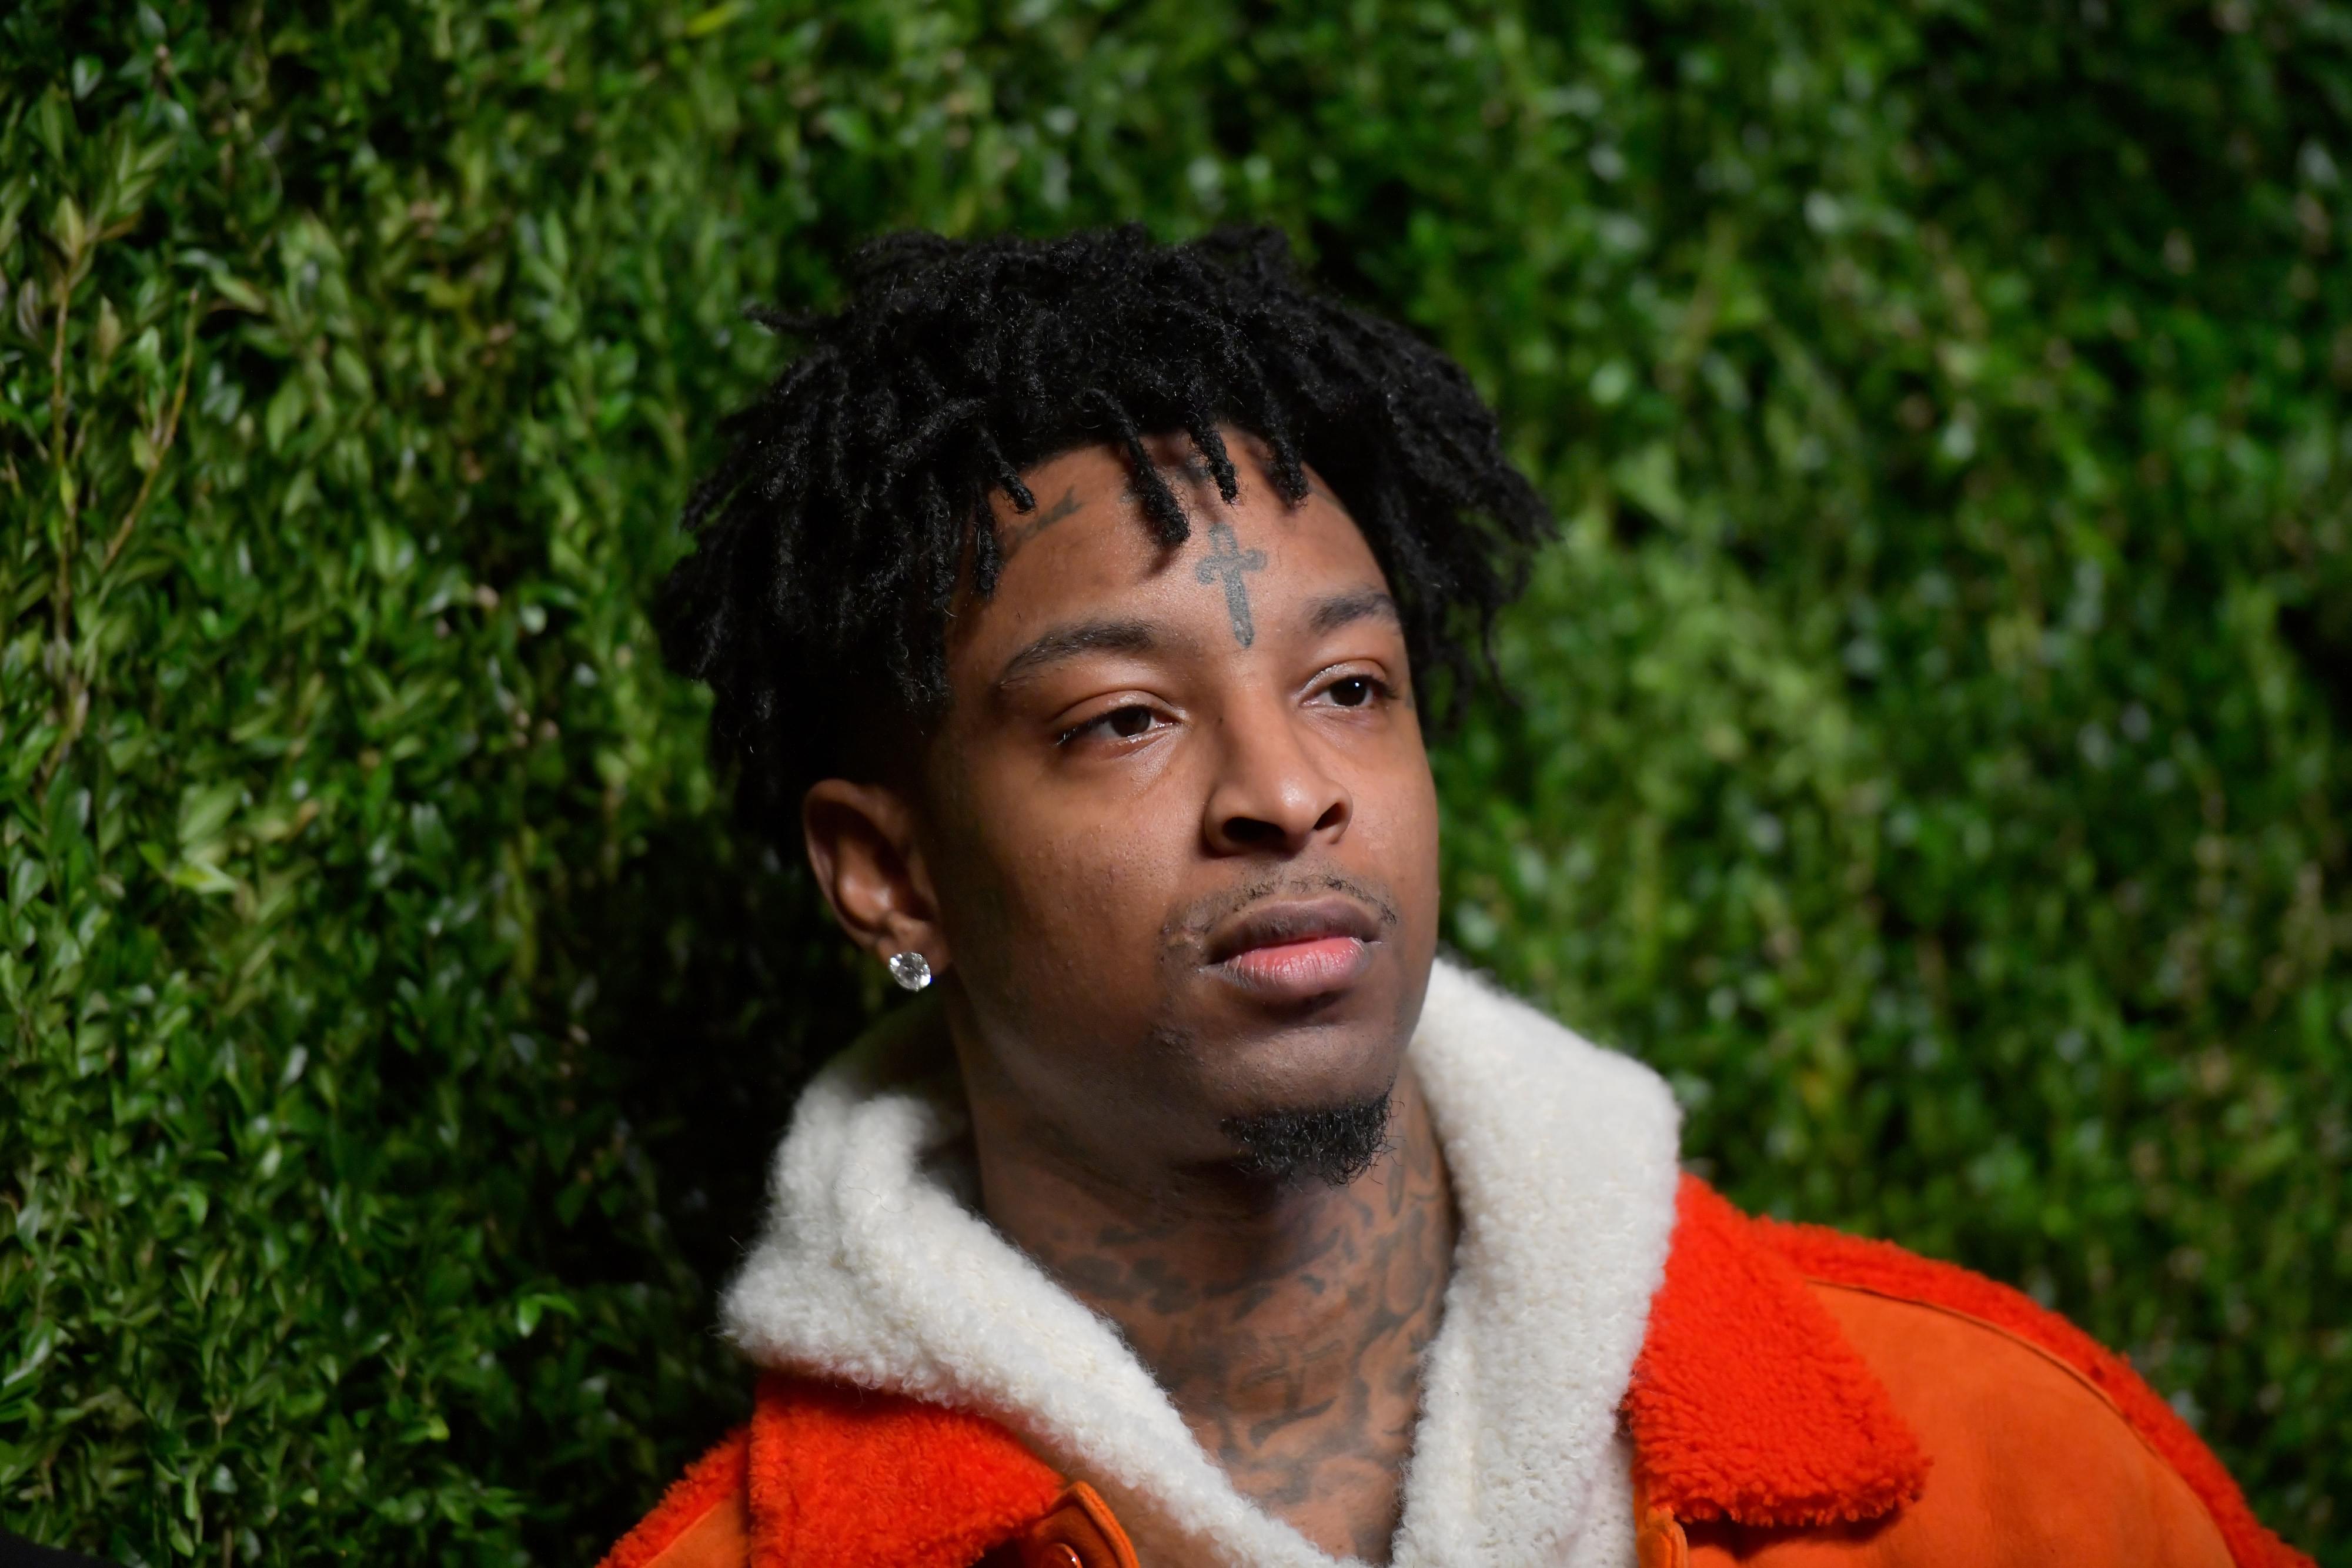 21 Savage To Give 150 Jobs To At-Risk Youth